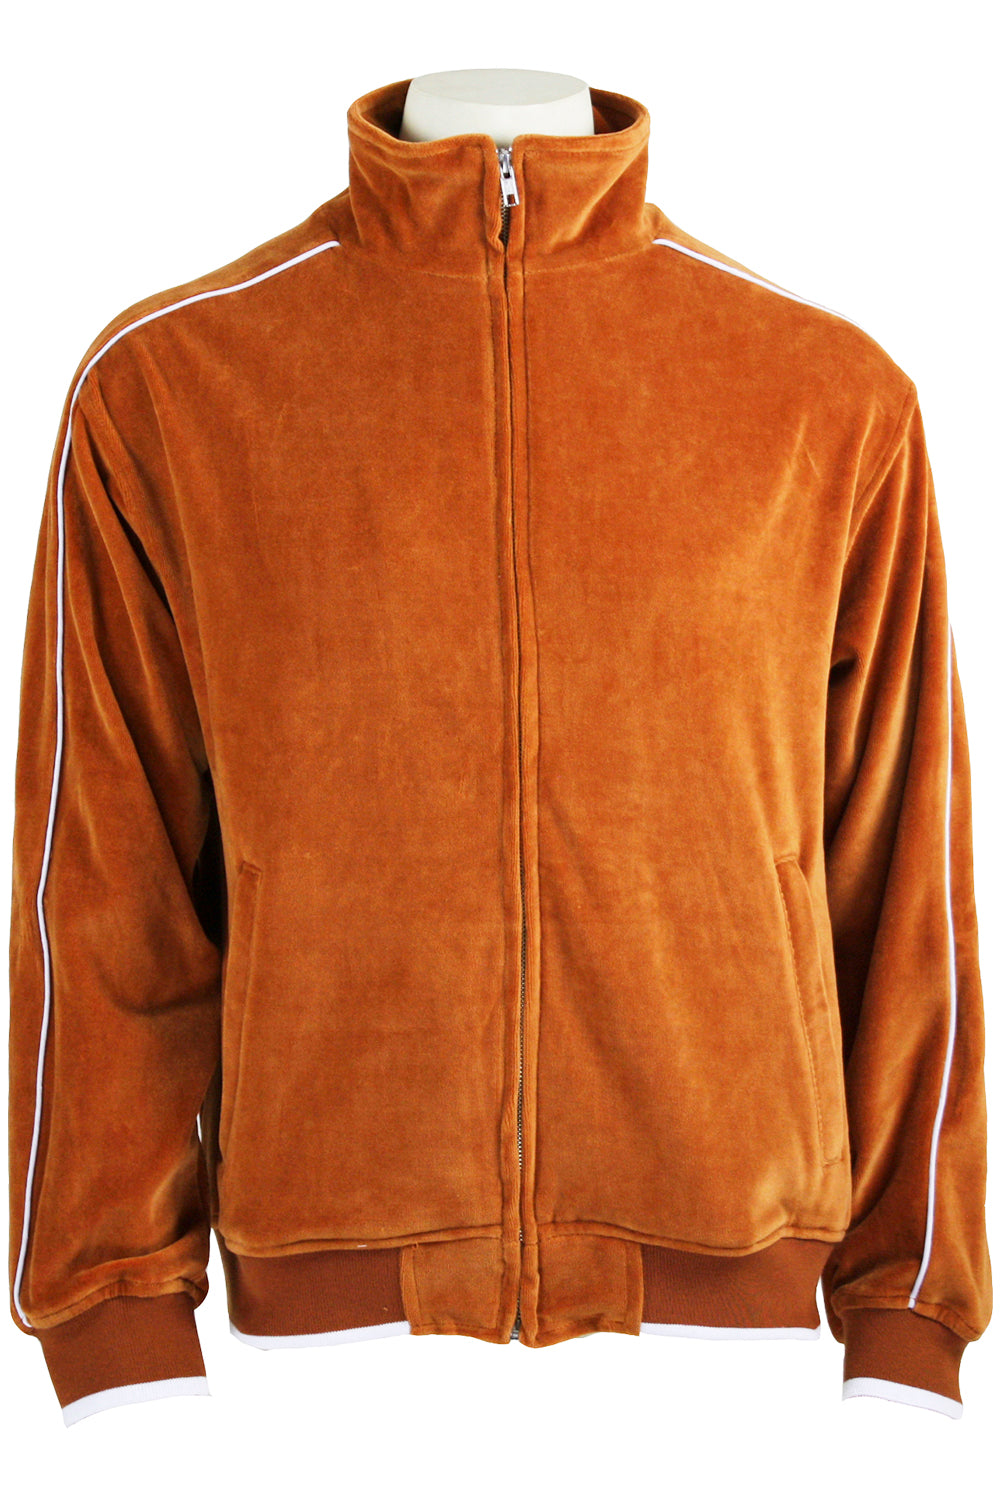 Mens Burnt Orange Velour Tracksuit with White Piping